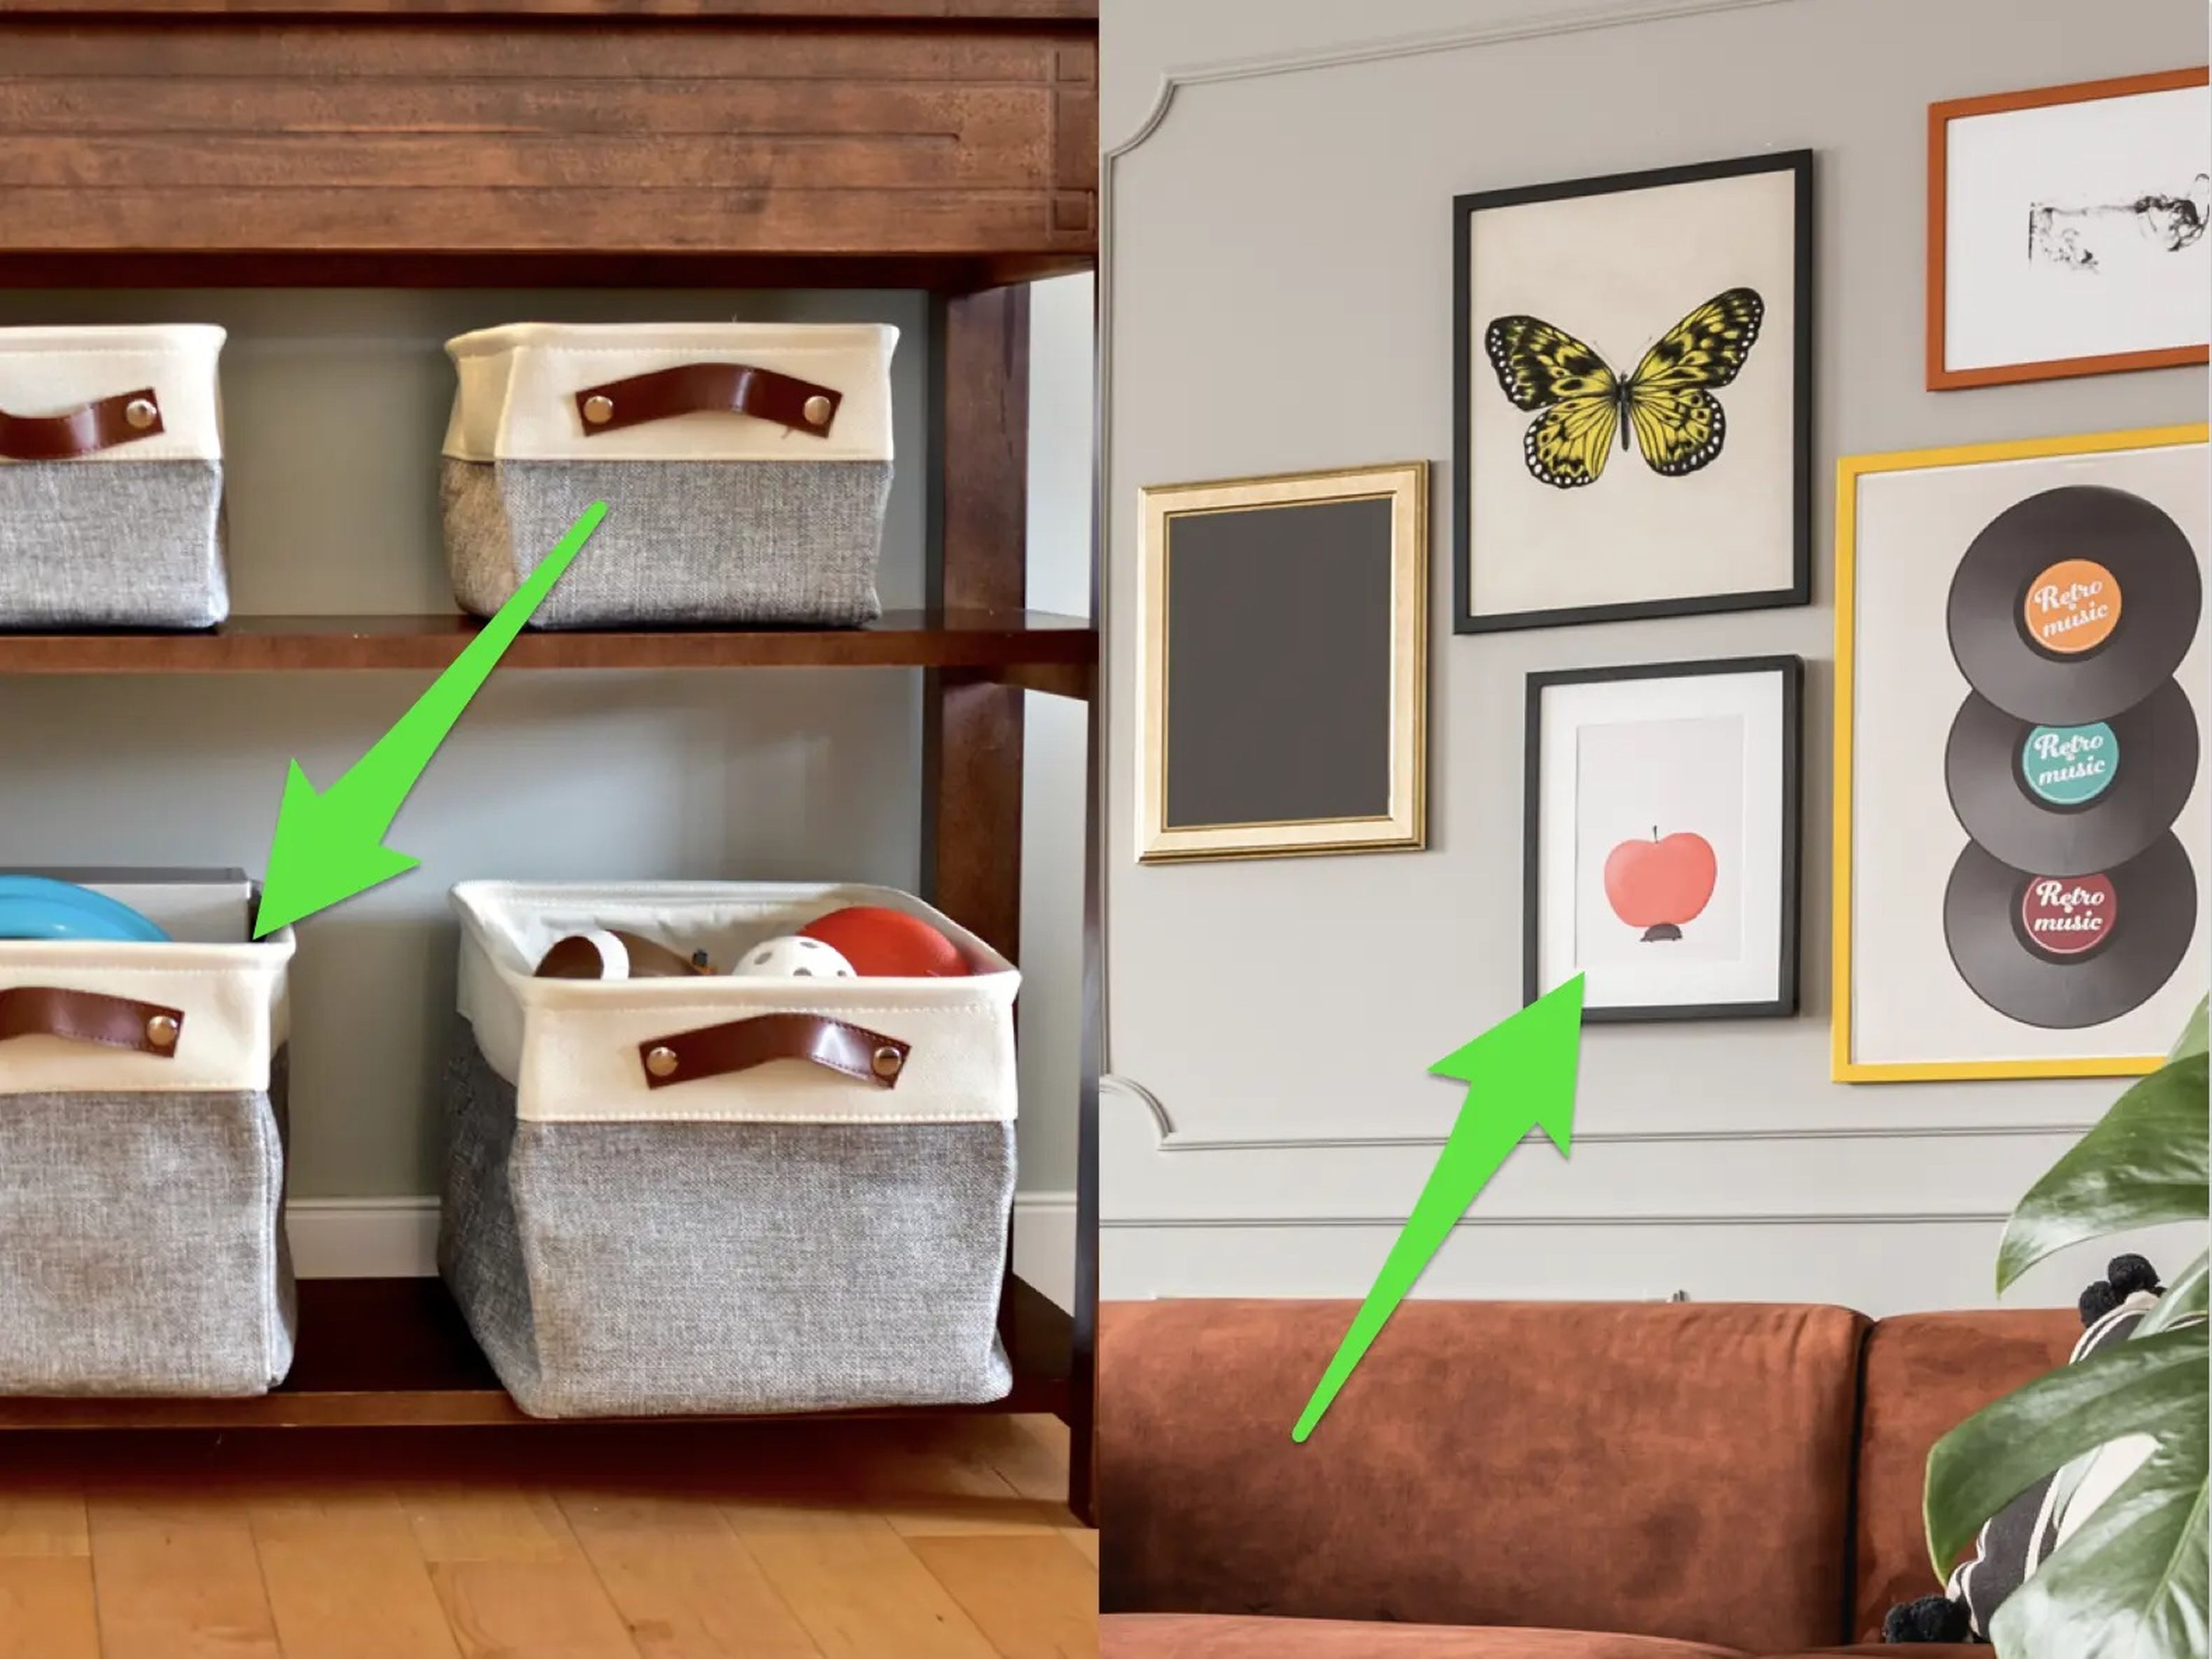 Gray baskets with toys inside them and a green arrow pointing to a basket; A gallery wall above a terracotta couch and a green arrow pointing to an apple print